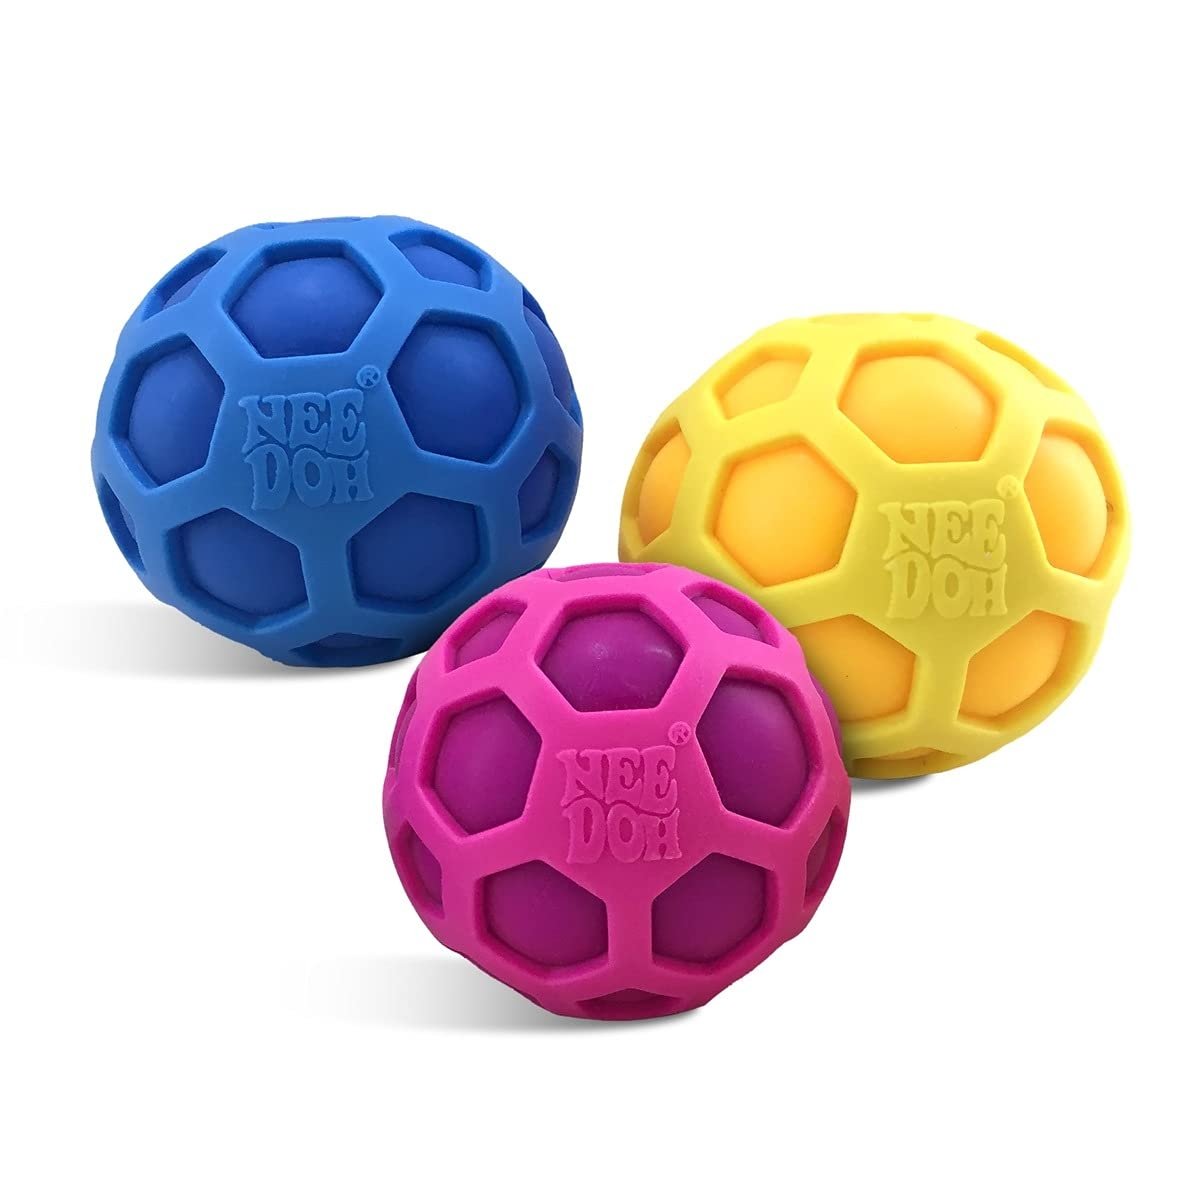 Atomic Nee Doh, Schylling’s Atomic Nee Doh is a unique fidget toy that will keep kids entertained for hours. The super squishy material oozes out when squeezed and creates a pop of colour. Atomic Nee Doh can be squished, squashed, pulled and smushed and will always bounce back into its original shape. Ideal for on the go fidget toy fun or as an anxiety reliever; it also helps children to focus and pay attention. Perfect for safe, stretchy fun - the perfect Nee Doh Stress Ball. Ideal as a gift or stocking fi